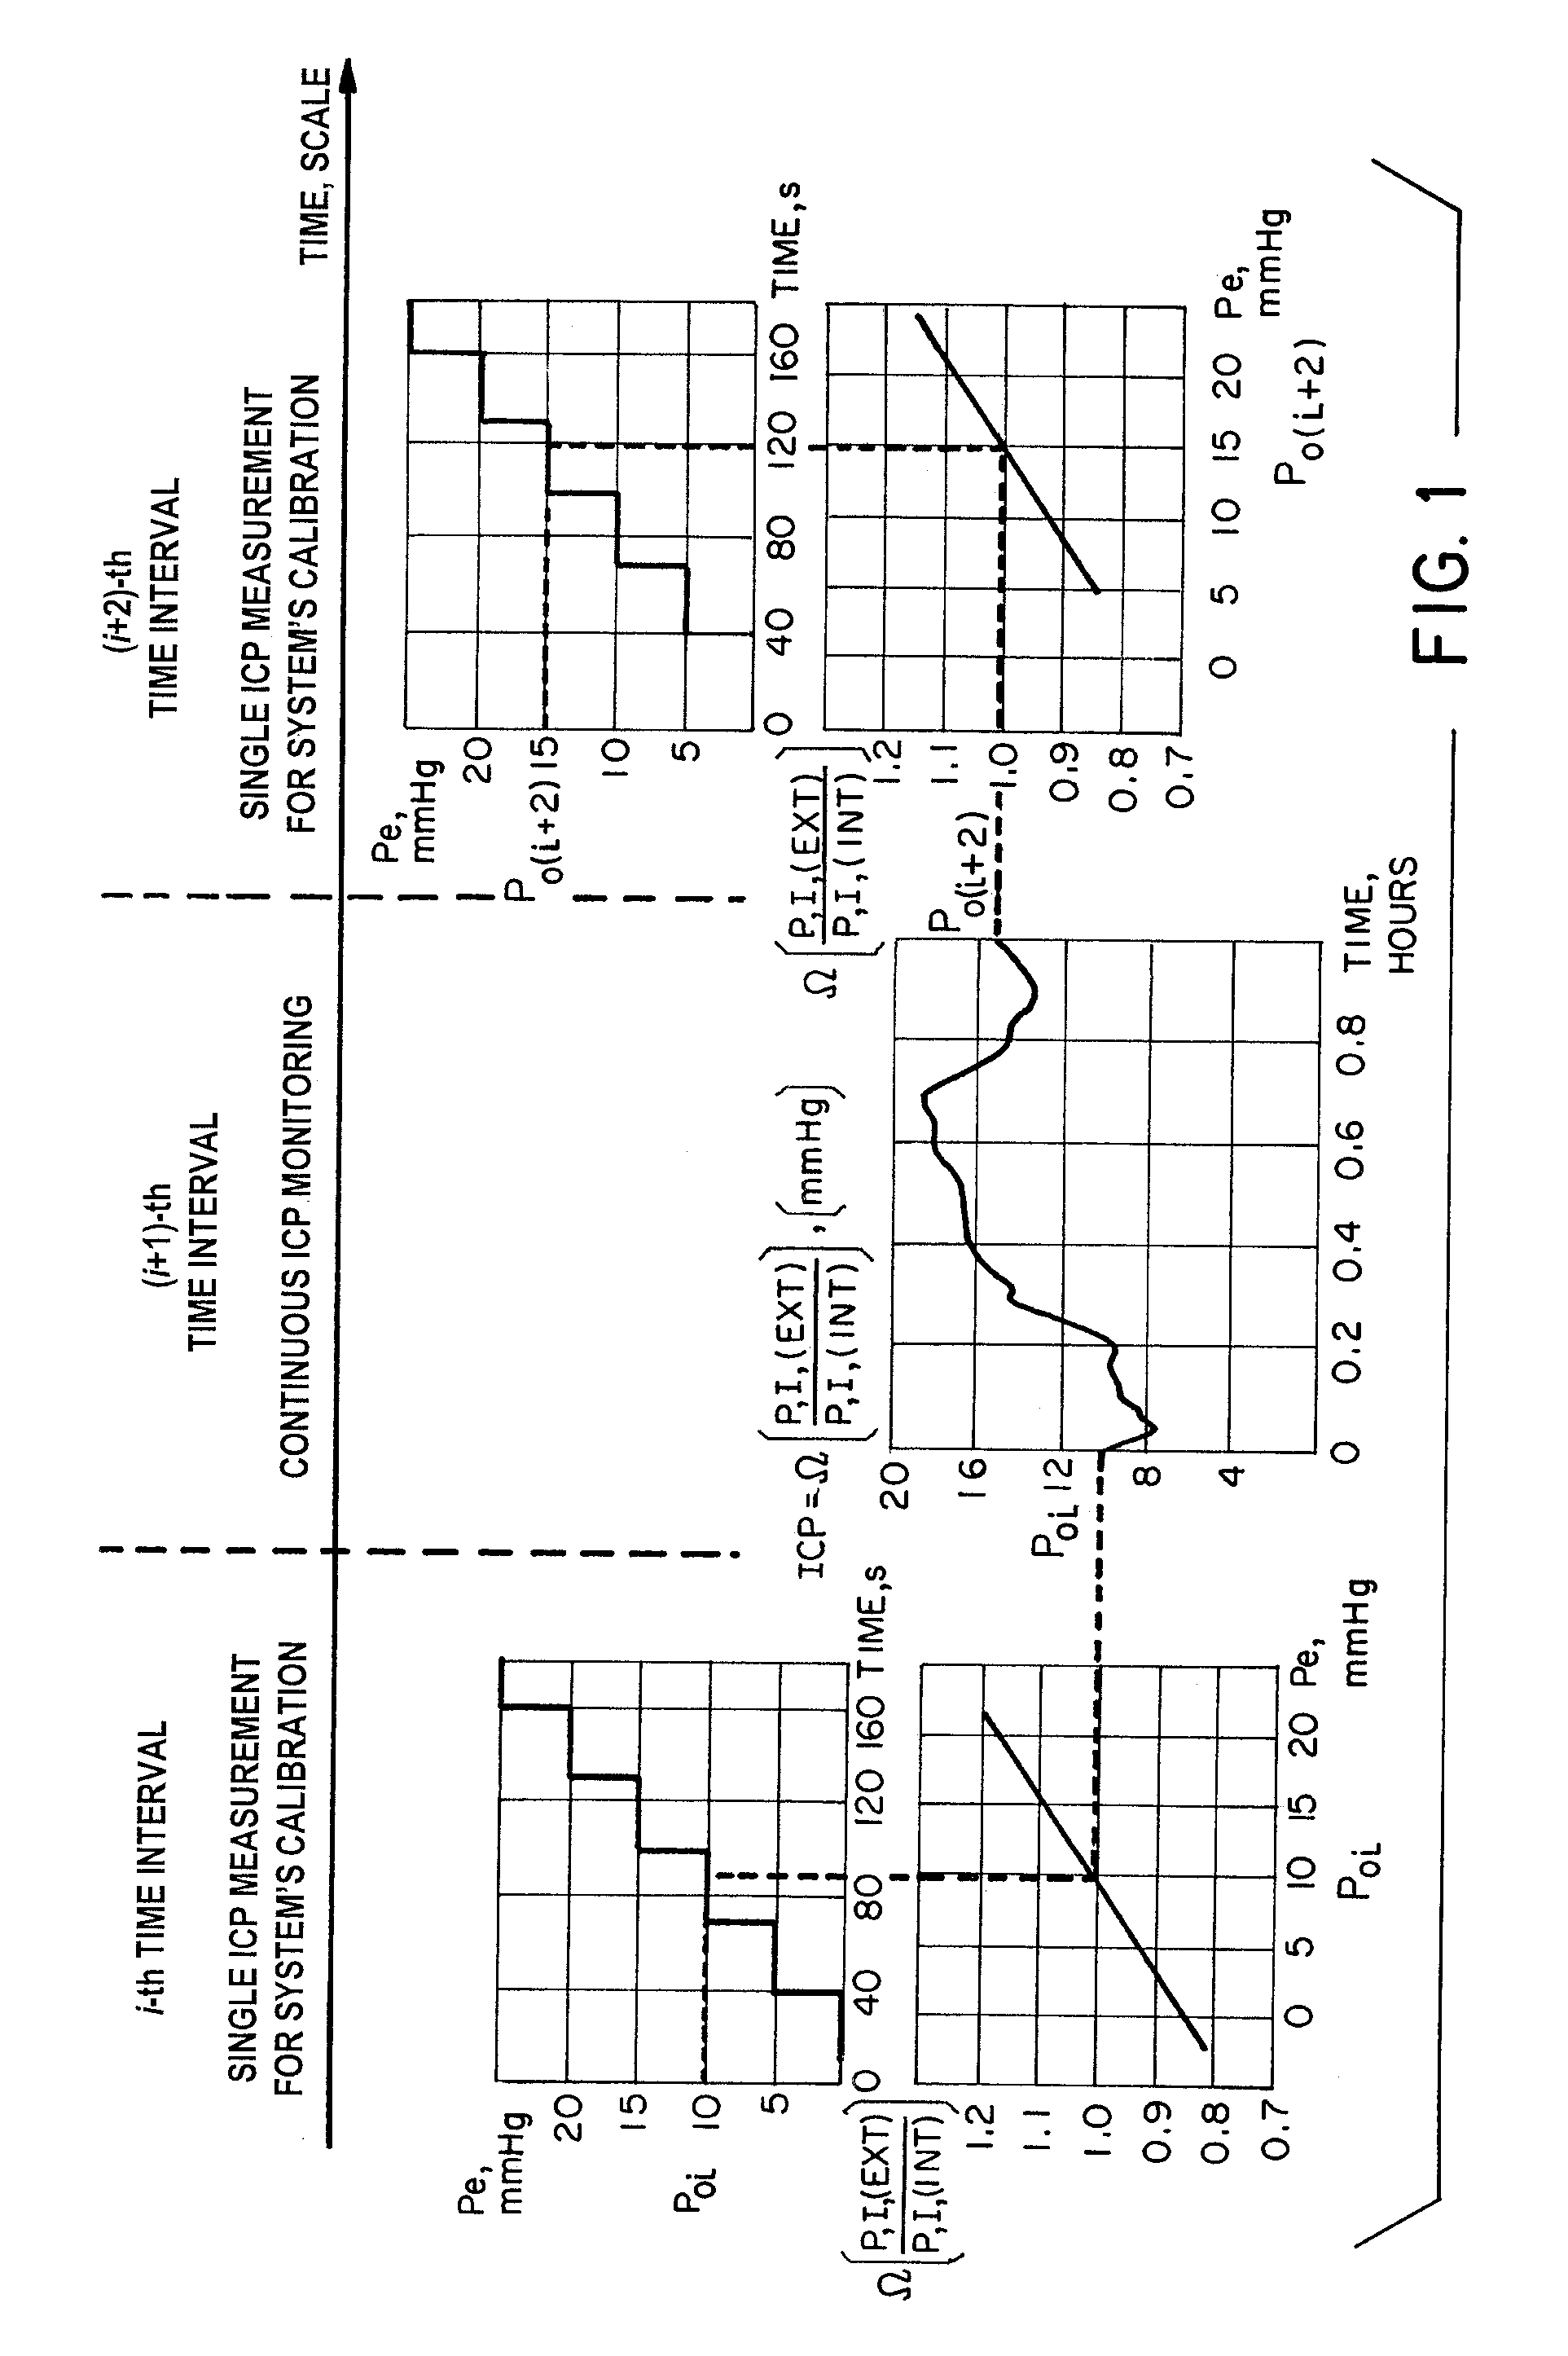 Method and Apparatus for Continuously Monitoring Intracranial Pressure